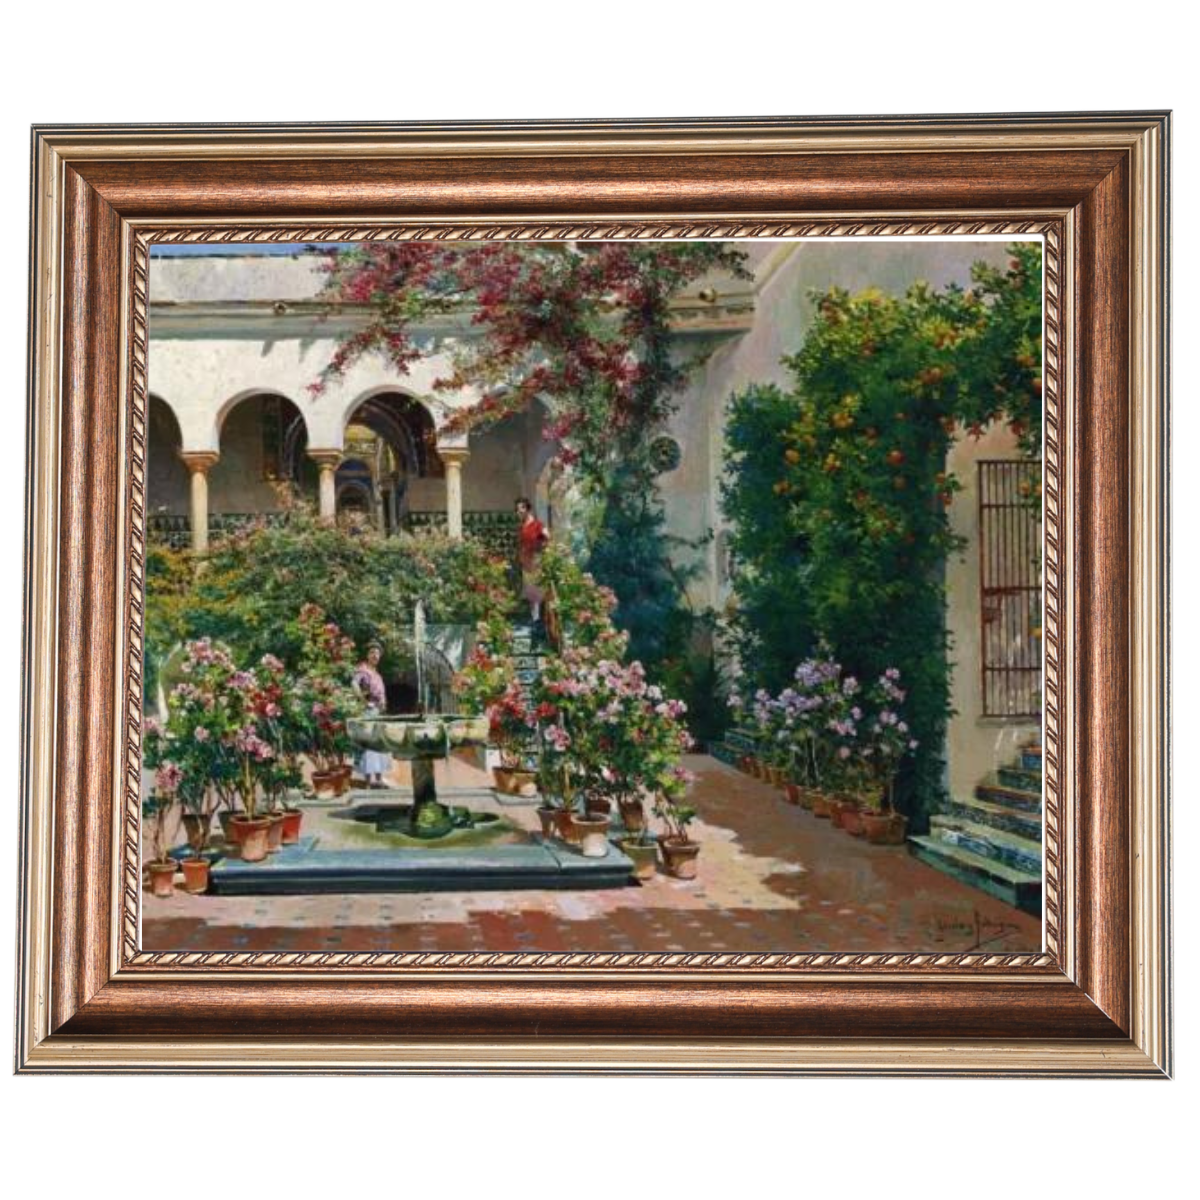 A Courtyard in Seville- Vintage  Canvas Wall Art Prints Decor For Living Room